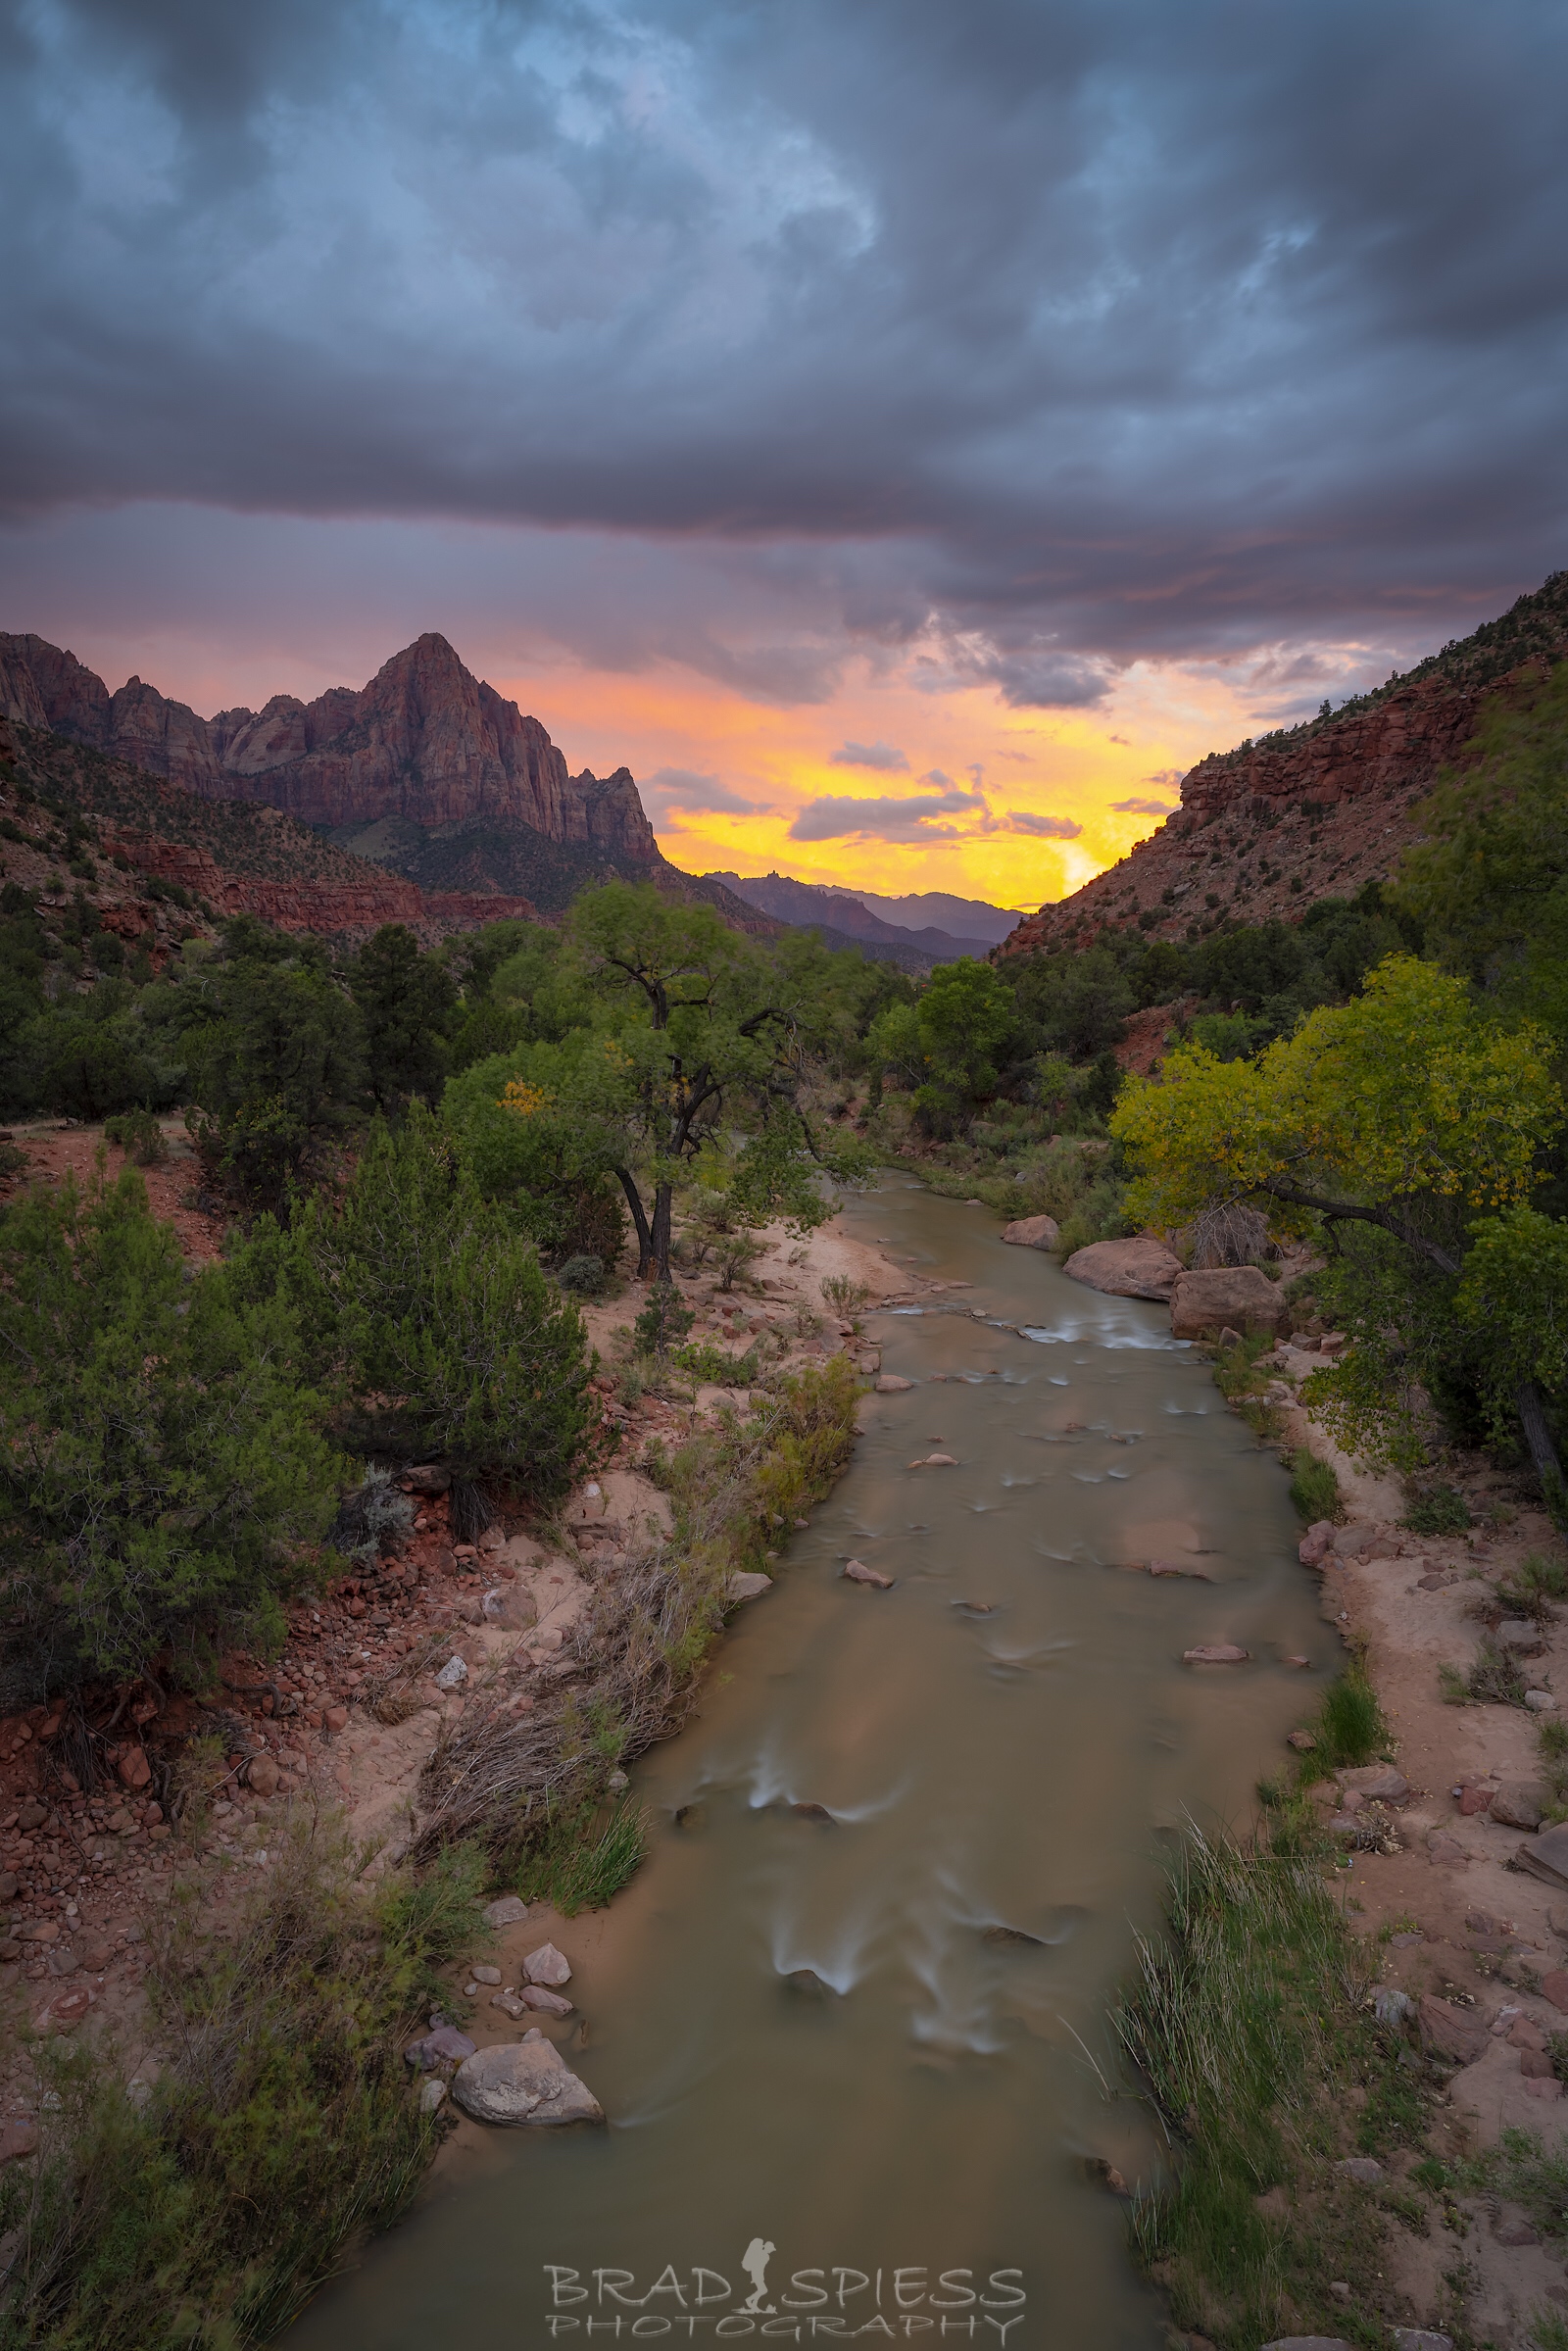 Looking out at a Stormy Sunset at the Watchman Bridge